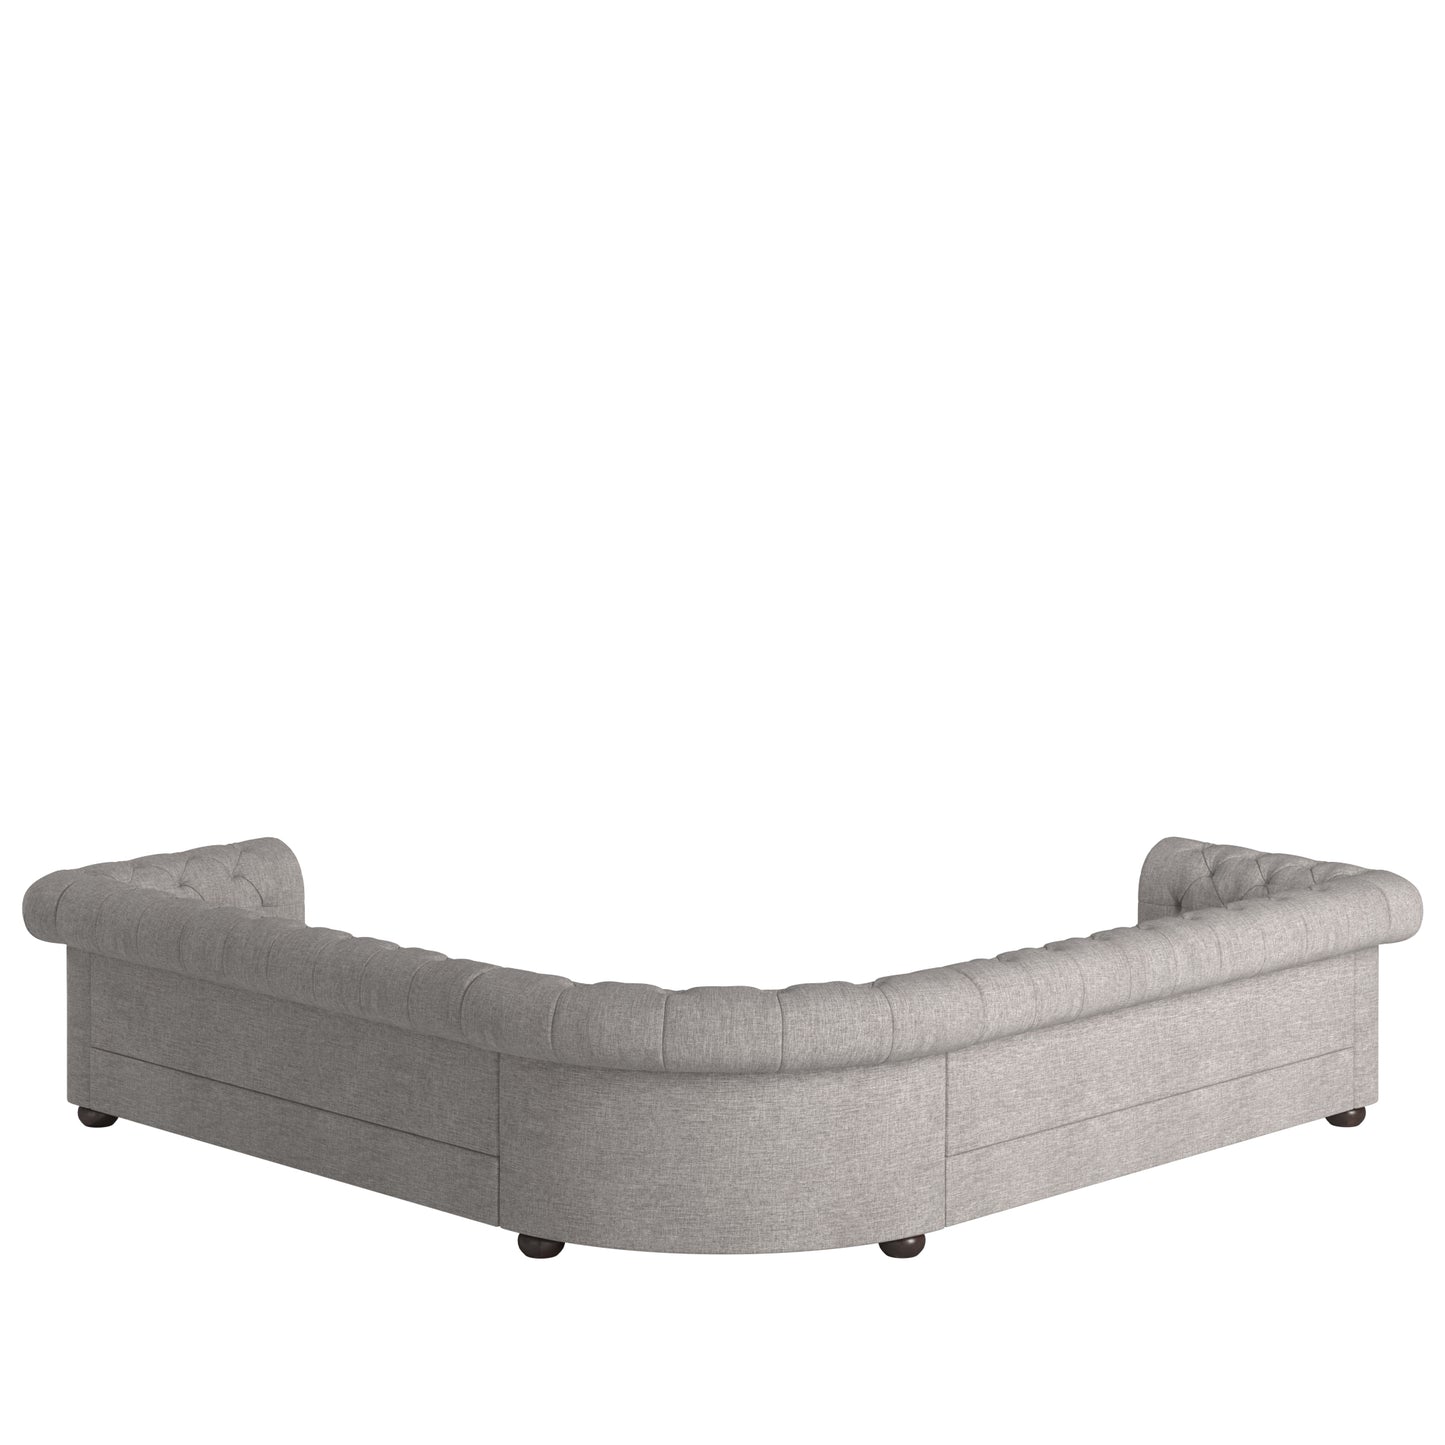 7-Seat L-Shaped Chesterfield Sectional Sofa - Grey Linen